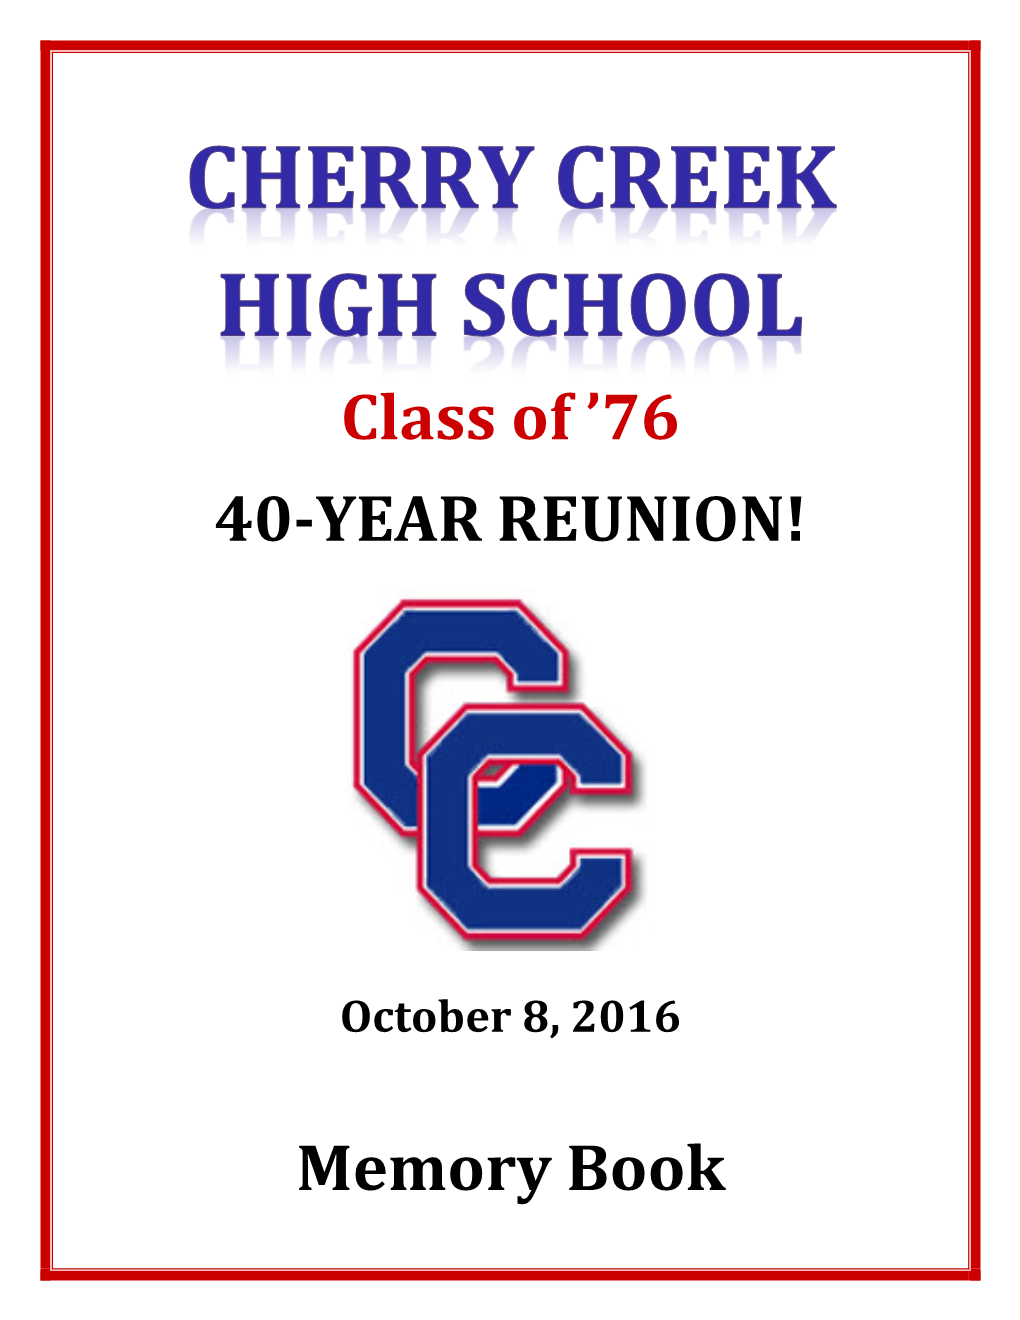 CHERRY CREEK HIGH SCHOOL - Class of ’76 Invites You to Come Join the Fun at Our Milestone 40-YEAR REUNION!